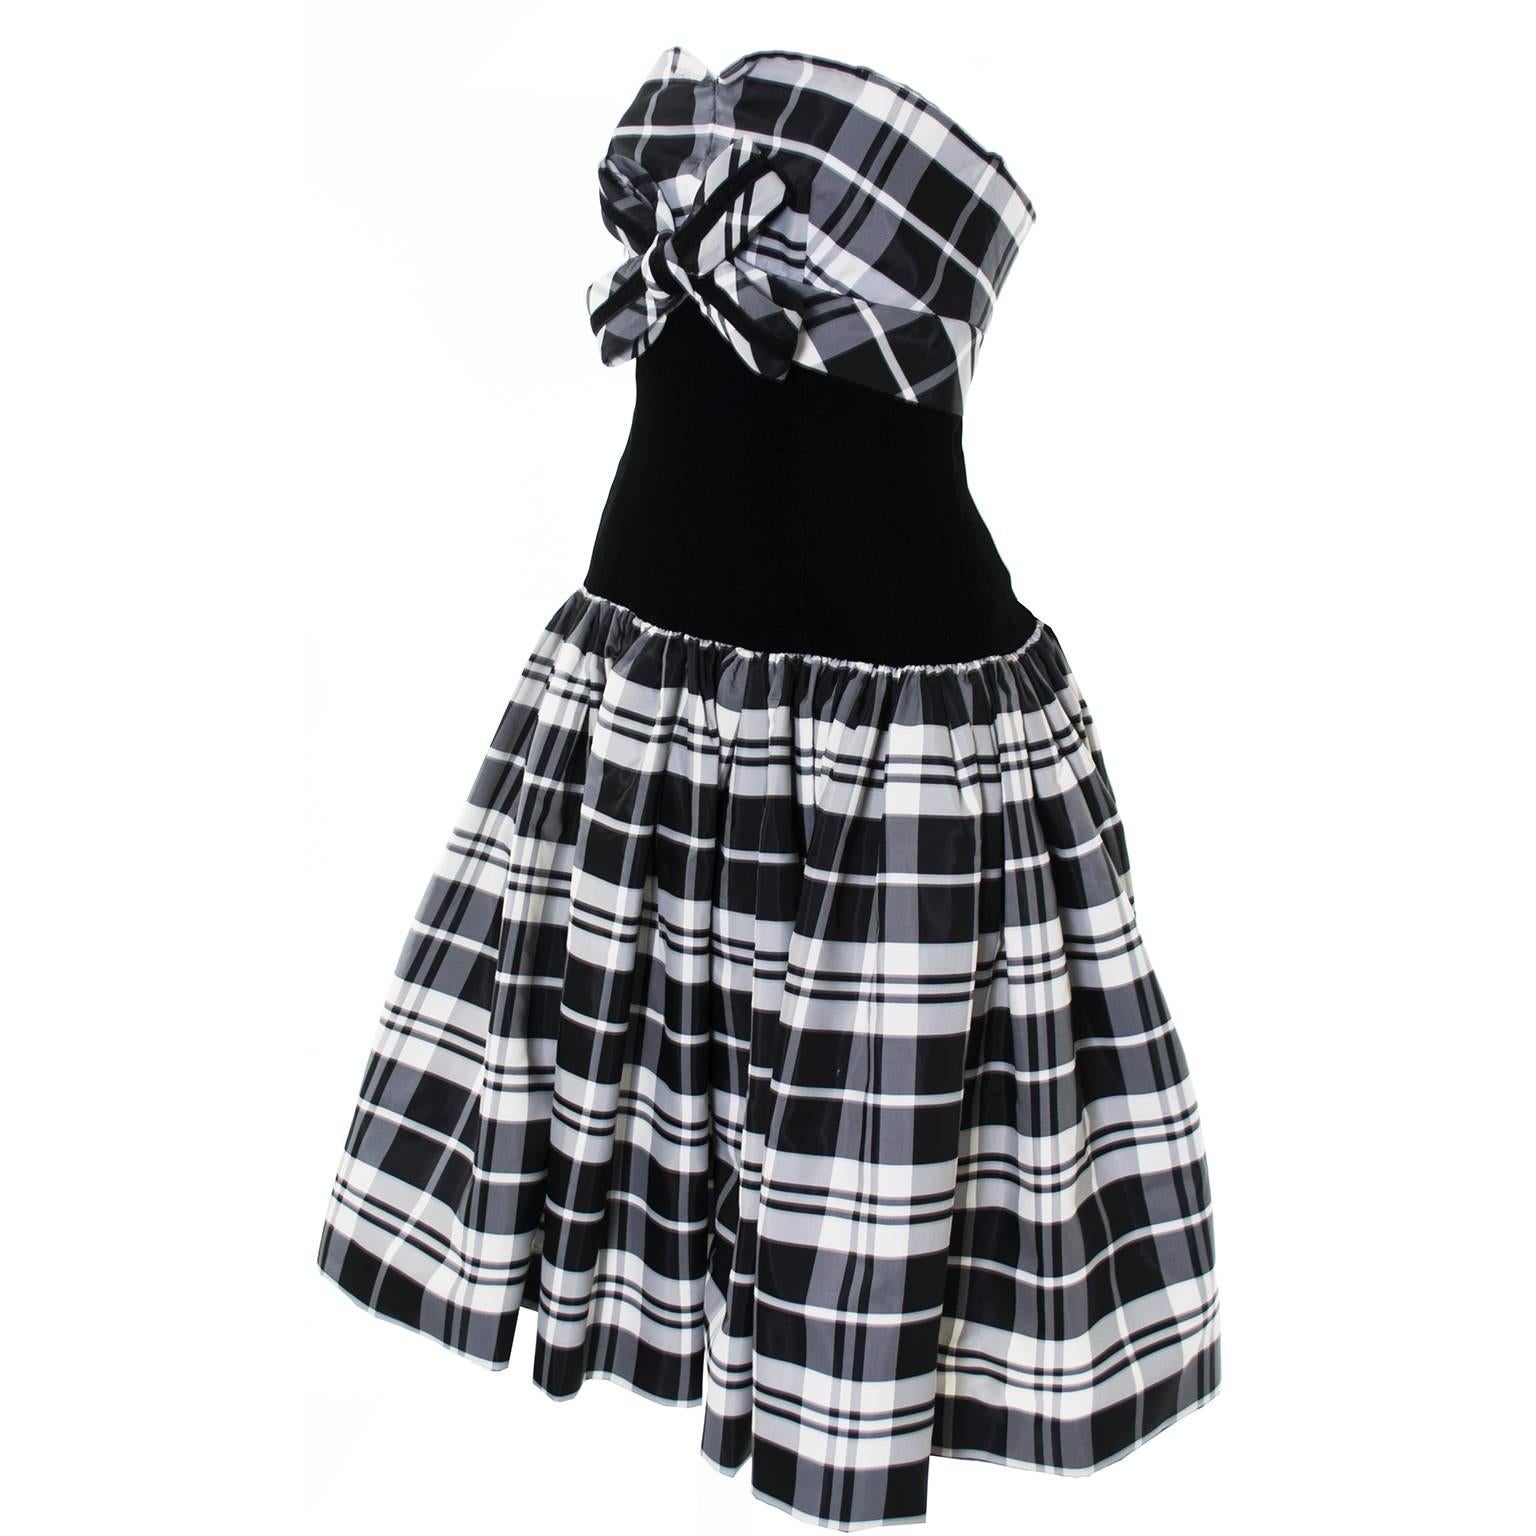 This is a terrific black and white tartan plaid taffeta party dress from Victor Costa.  I have always loved Victor Costa dresses and this one, from the 1980’s is really wonderful and appears unworn. The dress is strapless and lined with tulle for